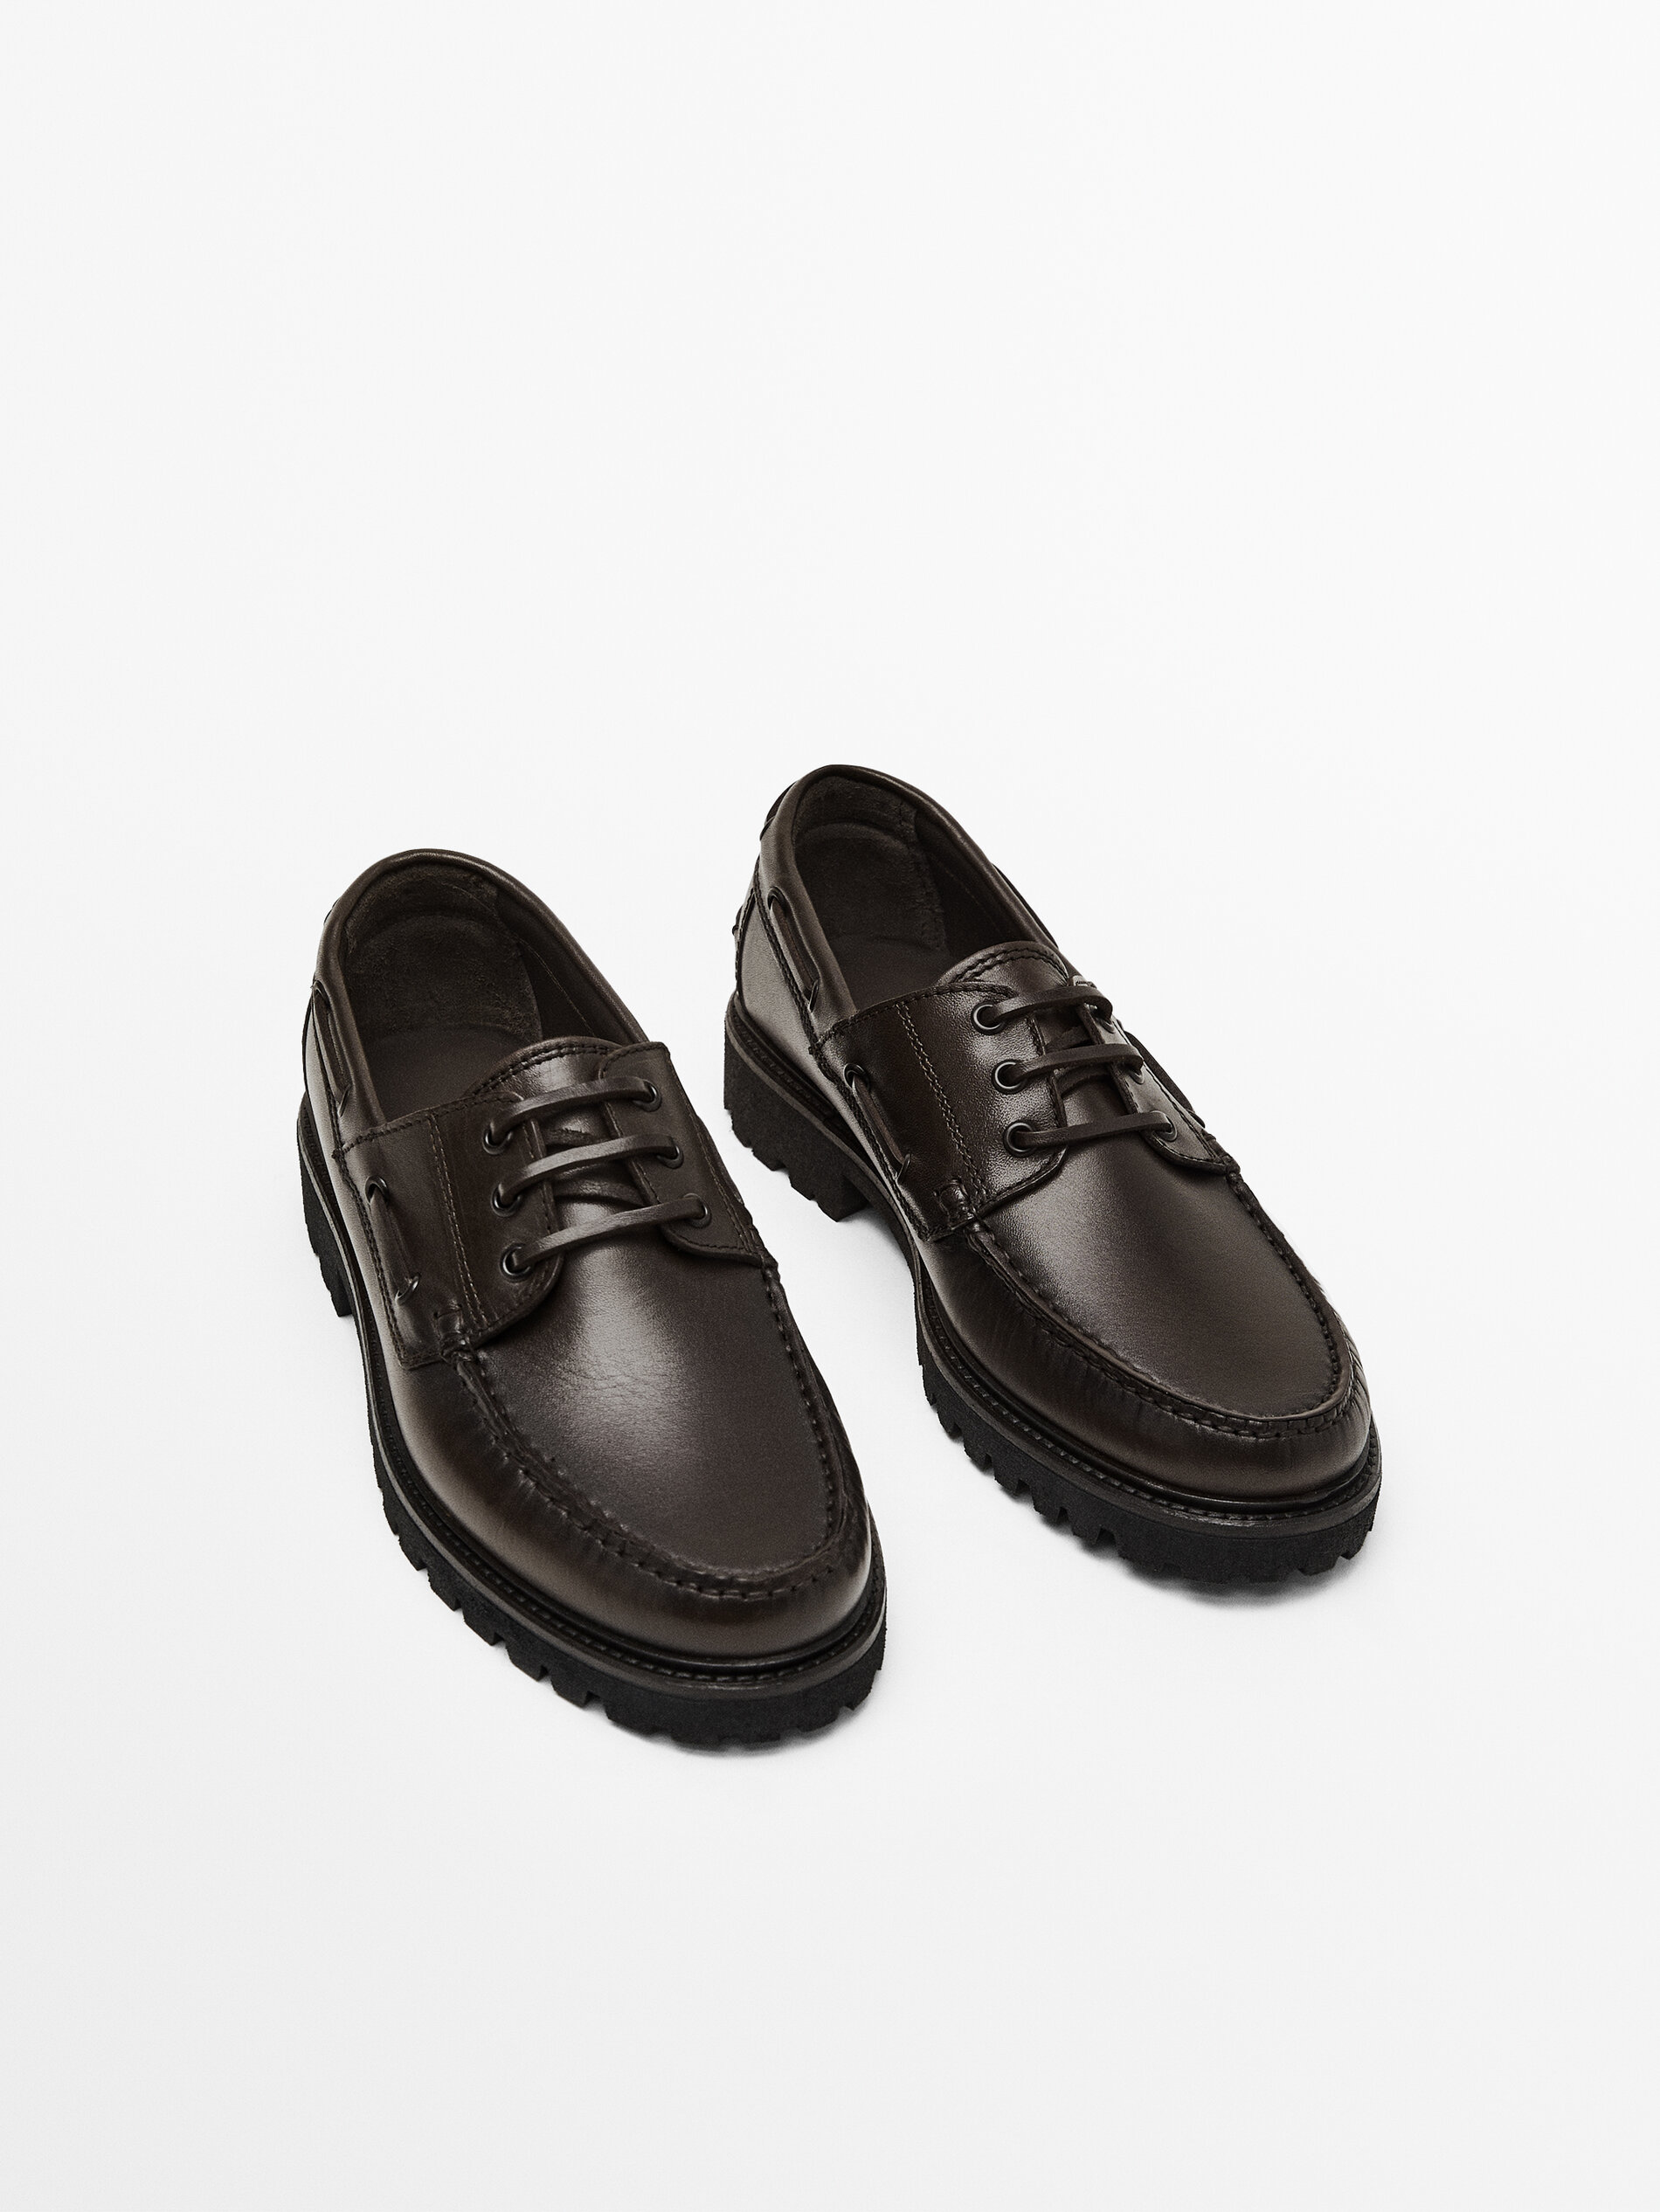 LEATHER DECK SHOES WITH TRACK SOLES